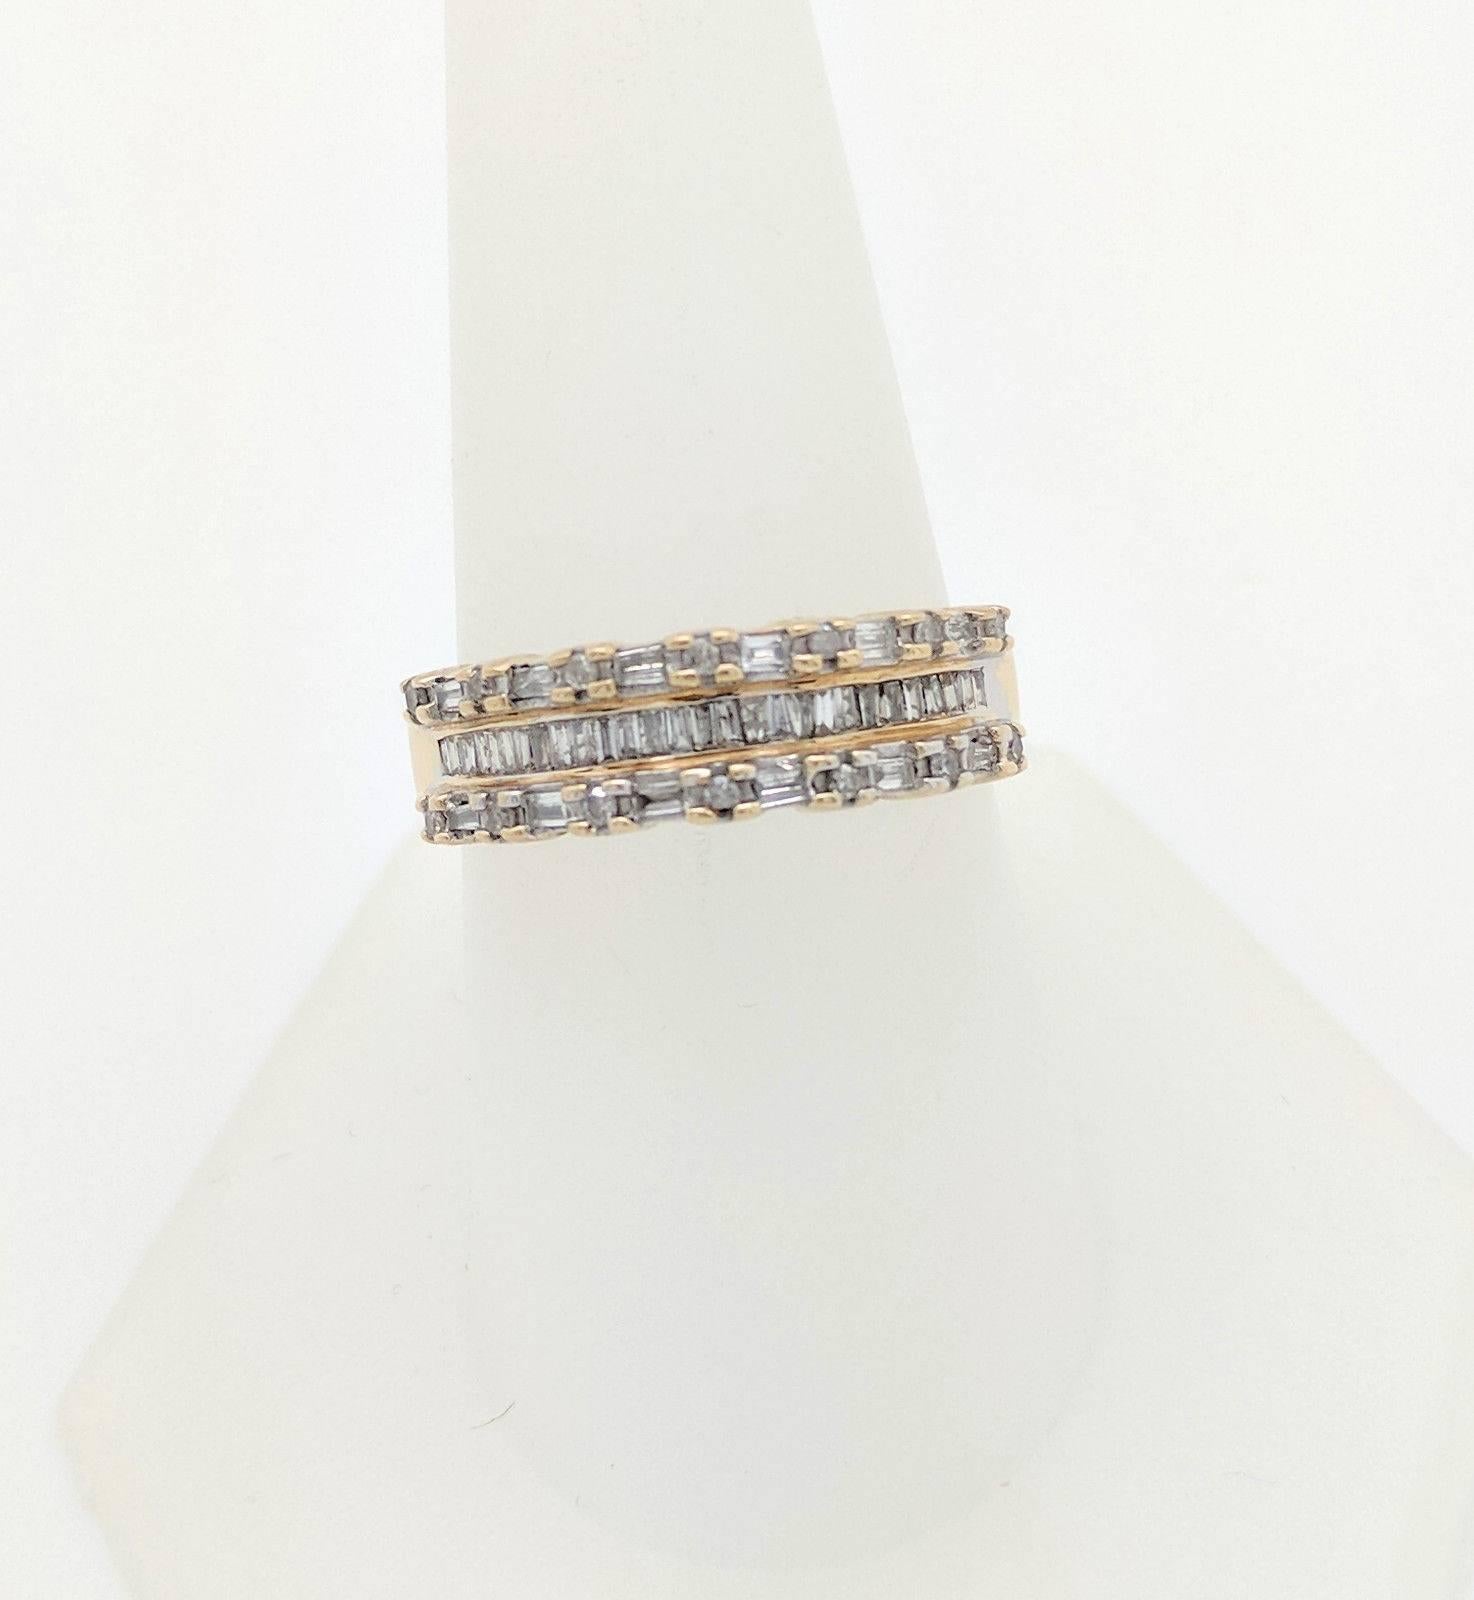 Ladies 10K Yellow Gold .50CTW Diamond Band Size 9

You are viewing a beautiful diamond band. This band is crafted from 10k yellow gold and weigh 3.4 grams. This ring features (28) baguette cut natural diamonds, (14) round natural diamonds and (12)